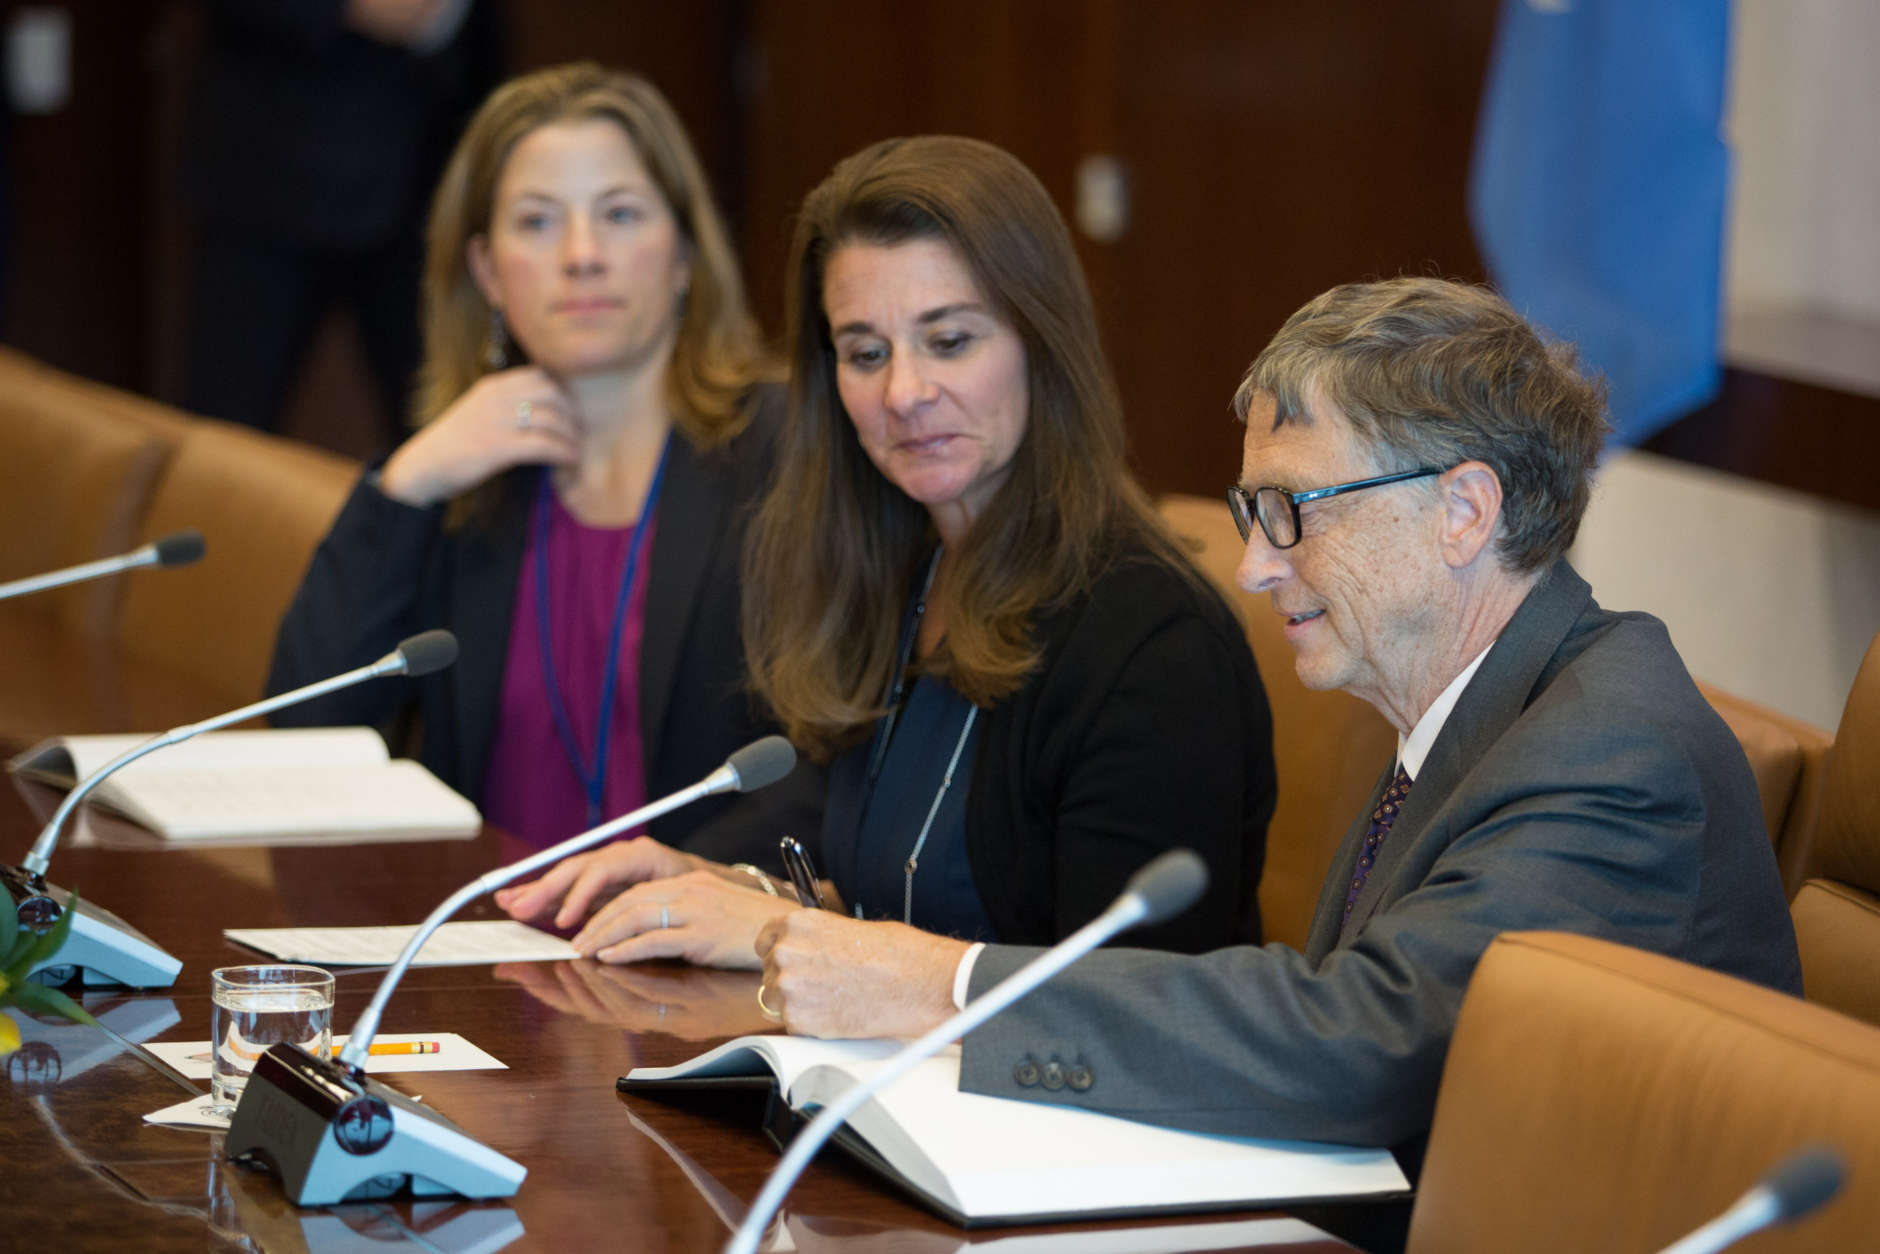 Melinda Gates, center, and Bill Gates, right, sign in during their meeting with Secretary-General Ban Ki-moon at the United Nations headquarters Friday, Sept. 25, 2015. The United Nations is conducting the Sustainable Development Summit with the goal of adopting of a post-2015 development agenda. (AP Photo/Kevin Hagen)